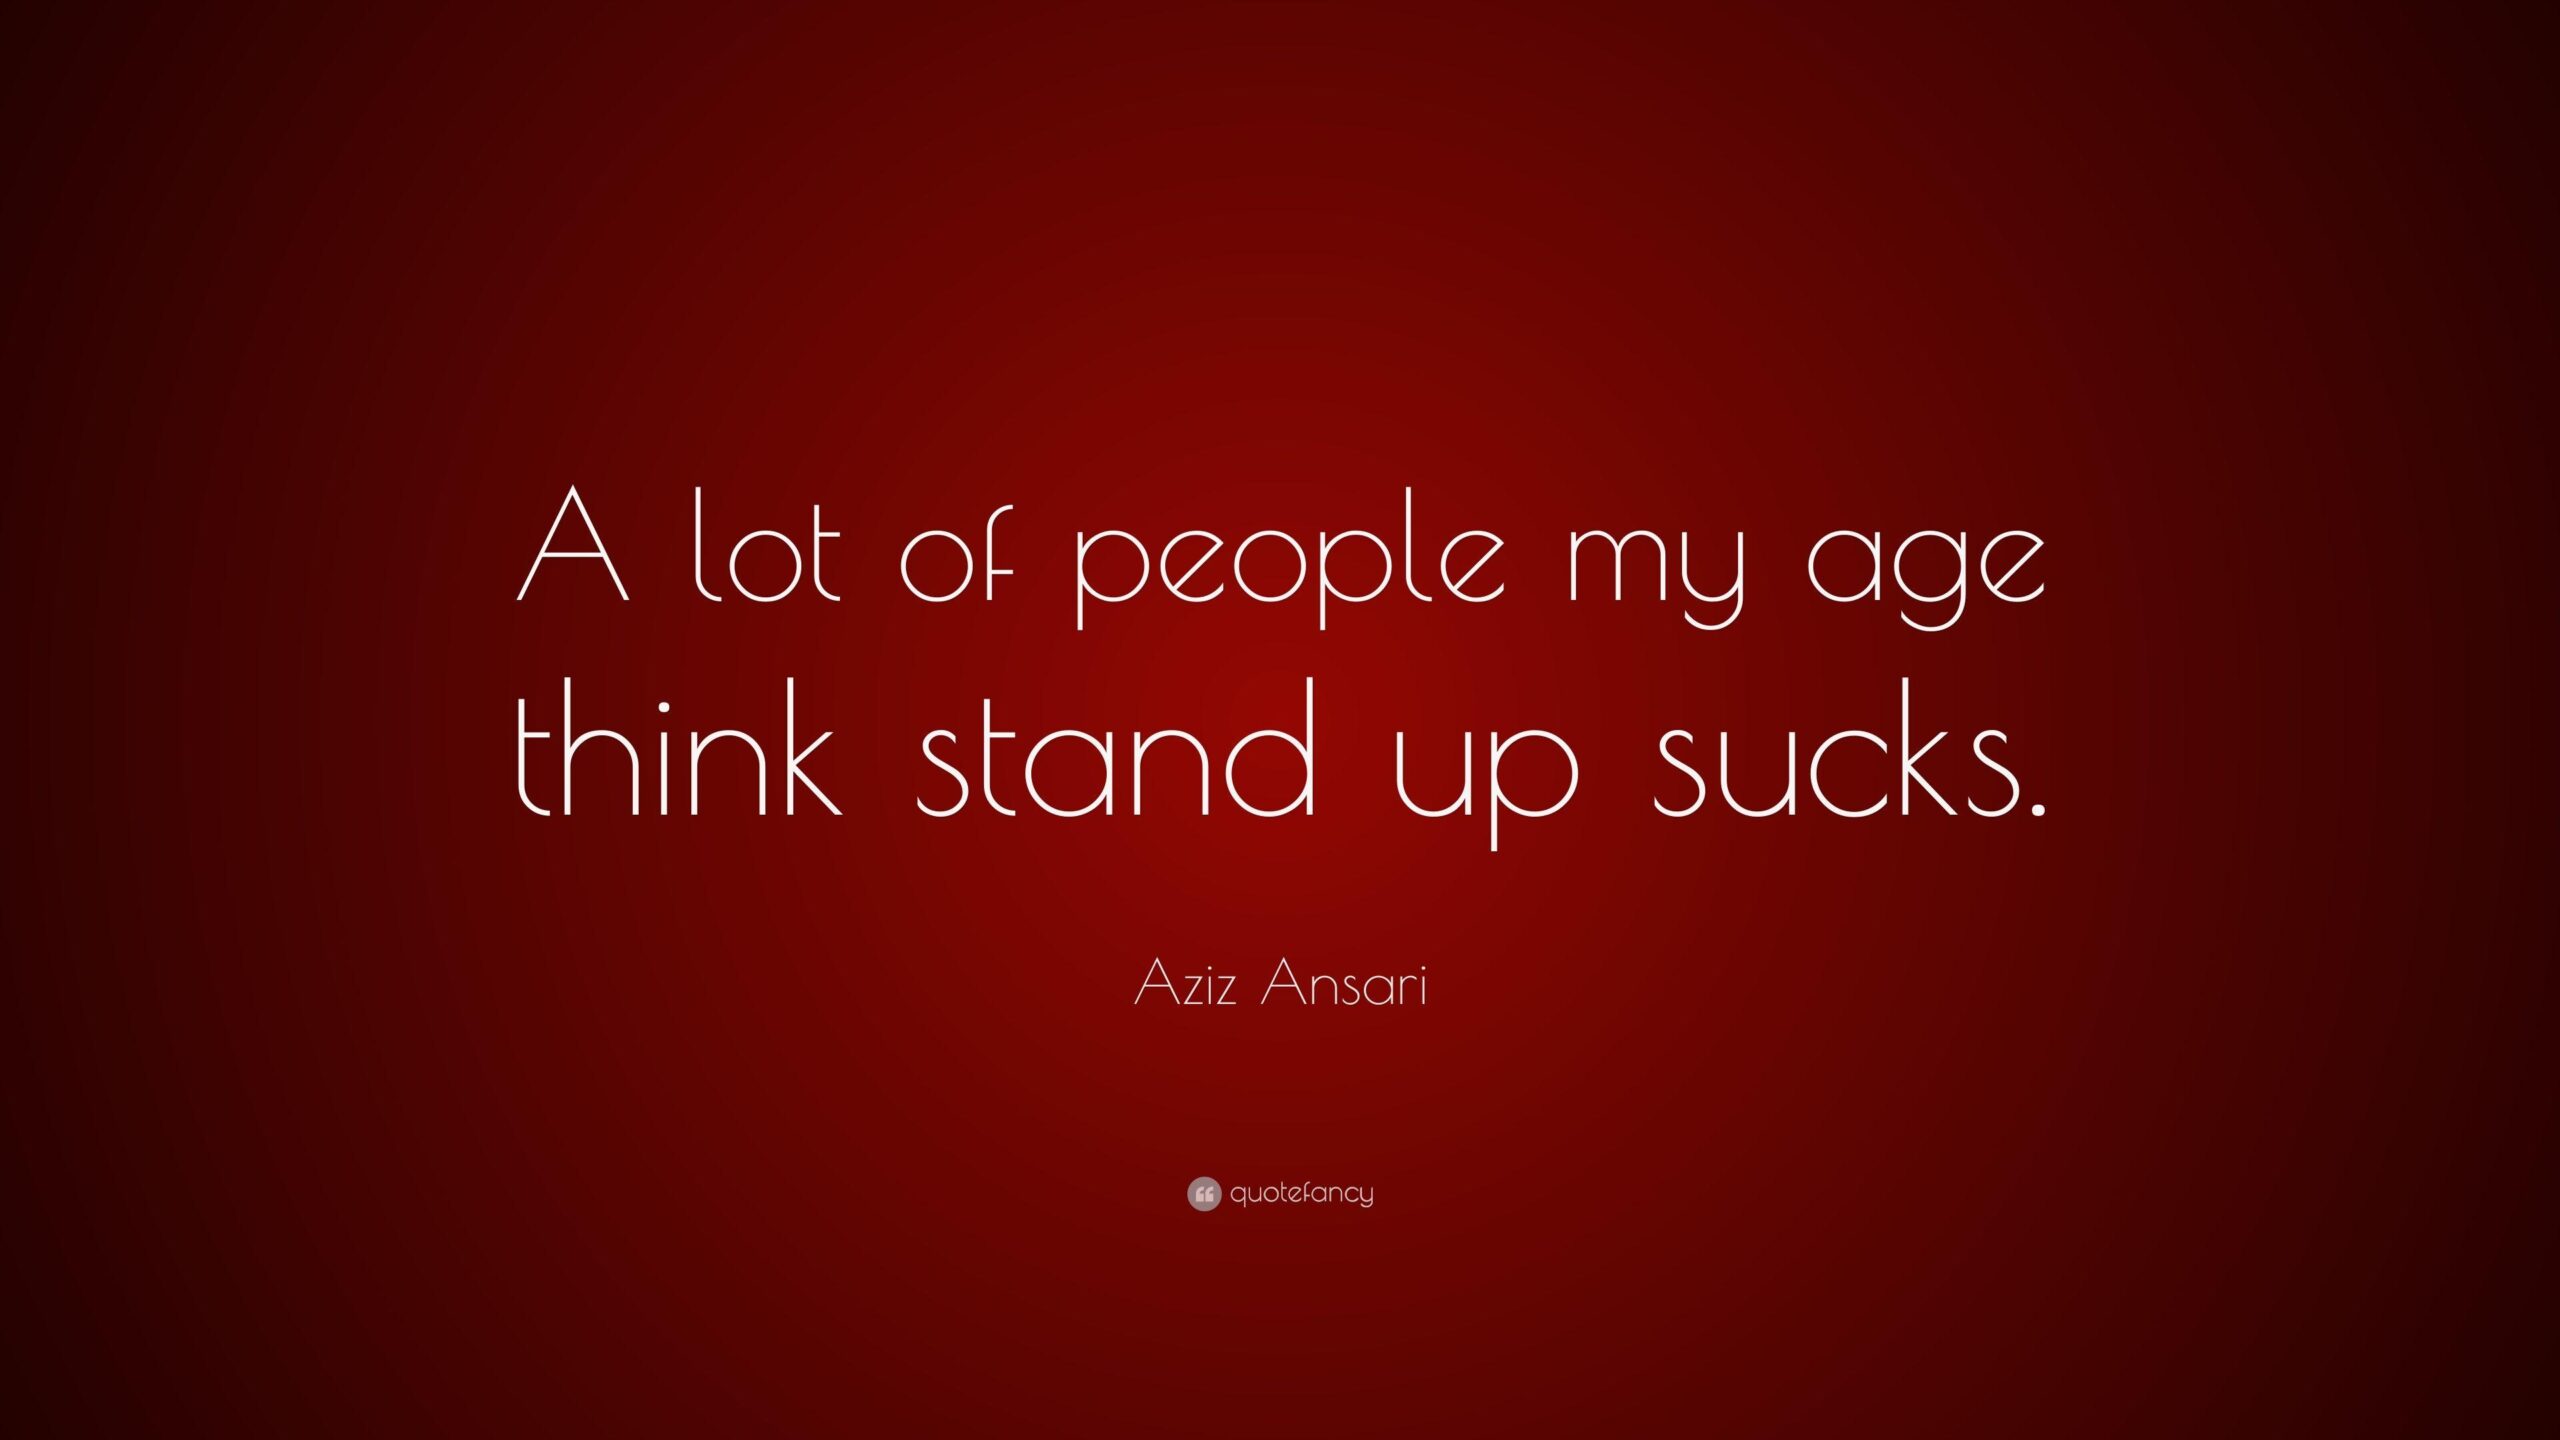 Aziz Ansari Quote “A lot of people my age think stand up sucks”